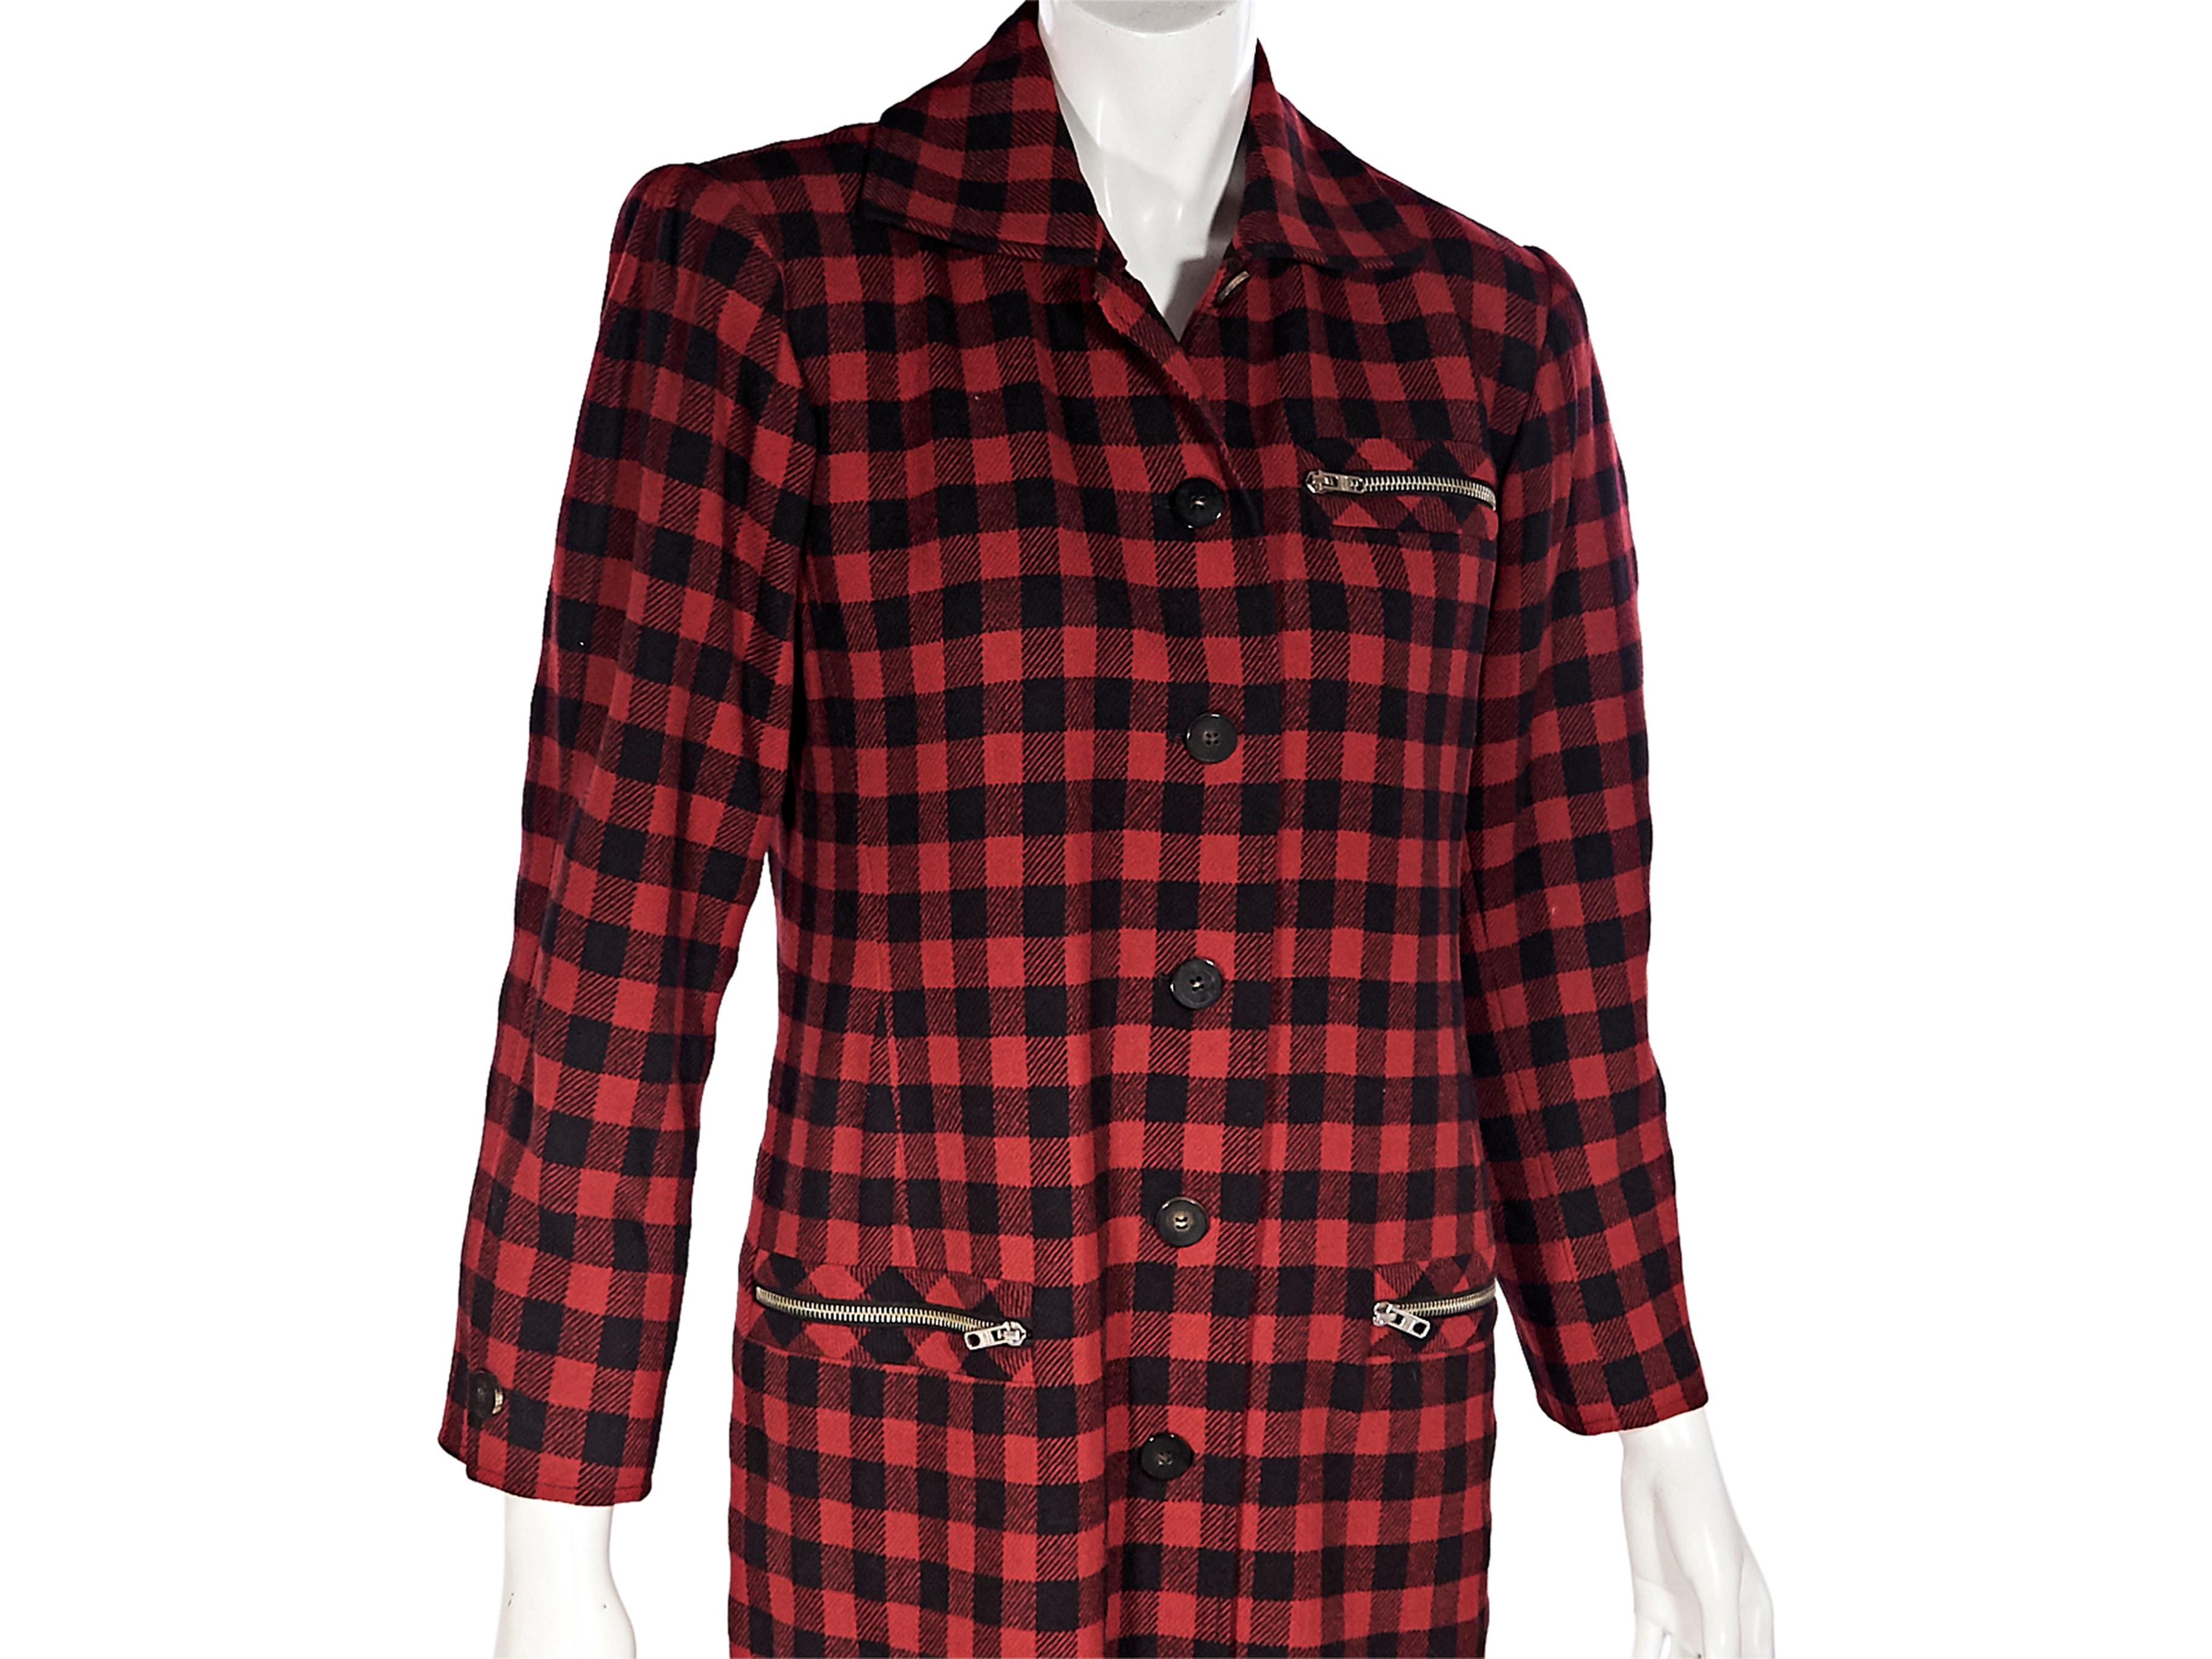 Women's Yves Saint Laurent Red And Black Variation Wool Checkered Jacket